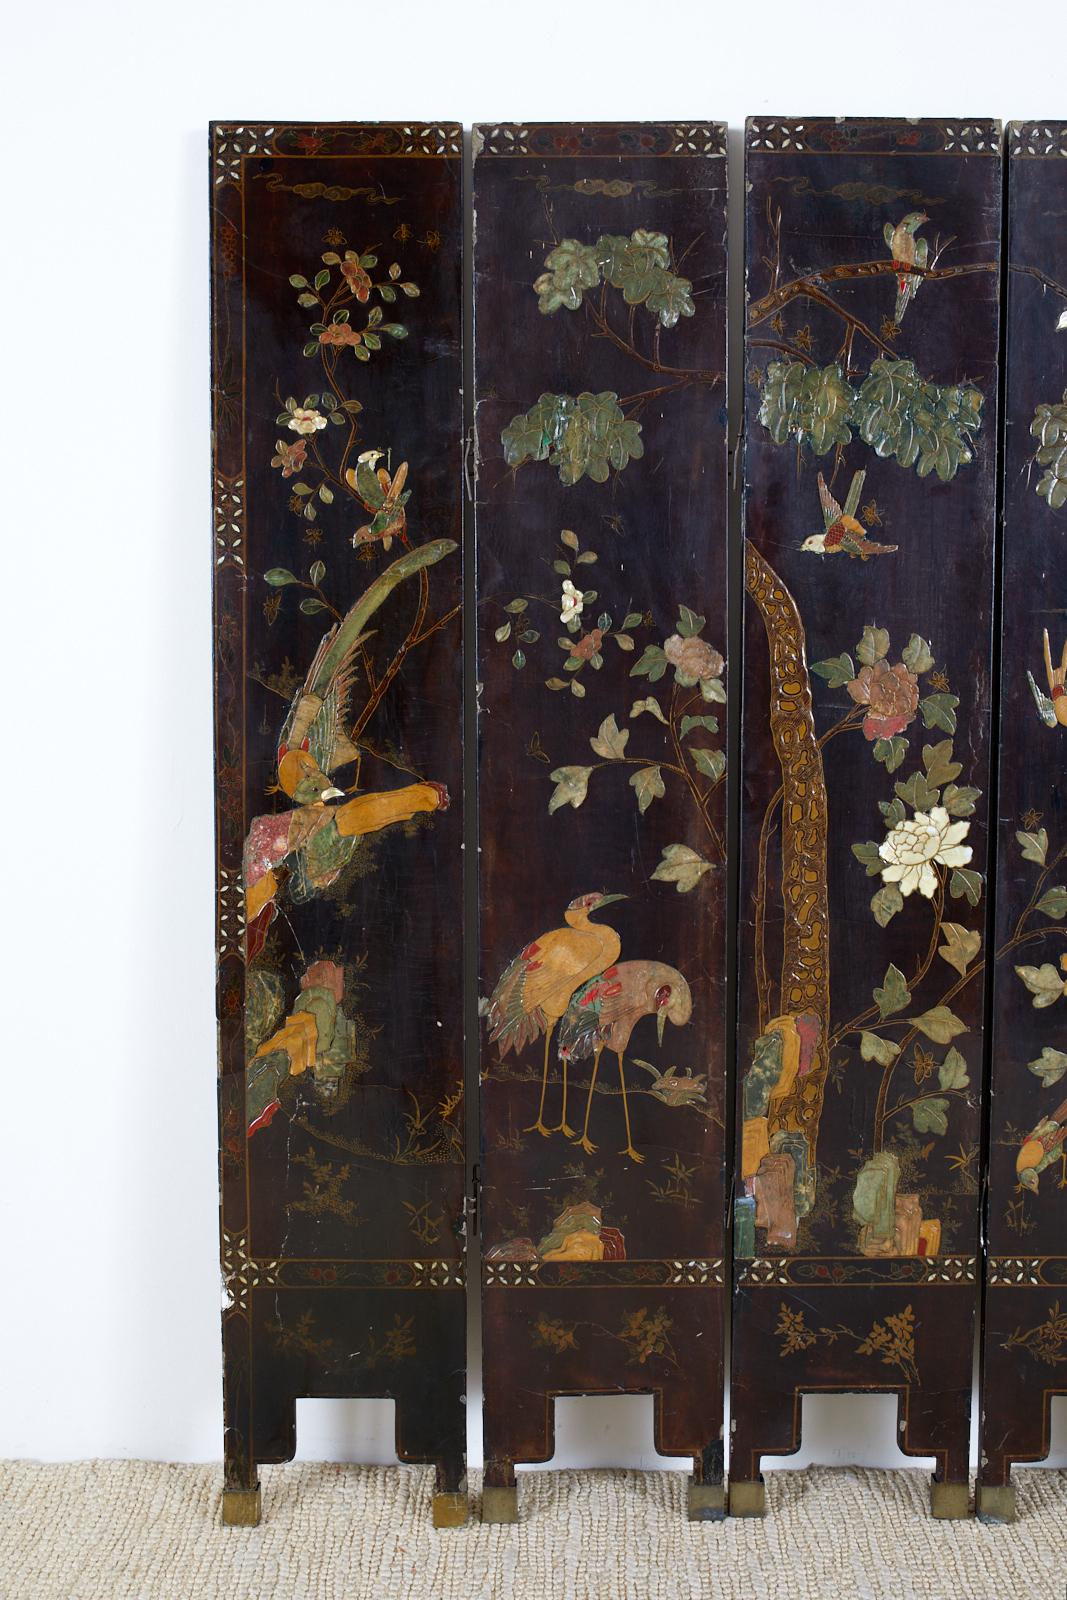 Beautifully distressed Chinese export six-panel coromandel screen featuring moriage lacquered panels of flora and fauna. Each panel is decorated exotic birds, cranes, flowers and trees with a thick soapstone style carved finish. The border is